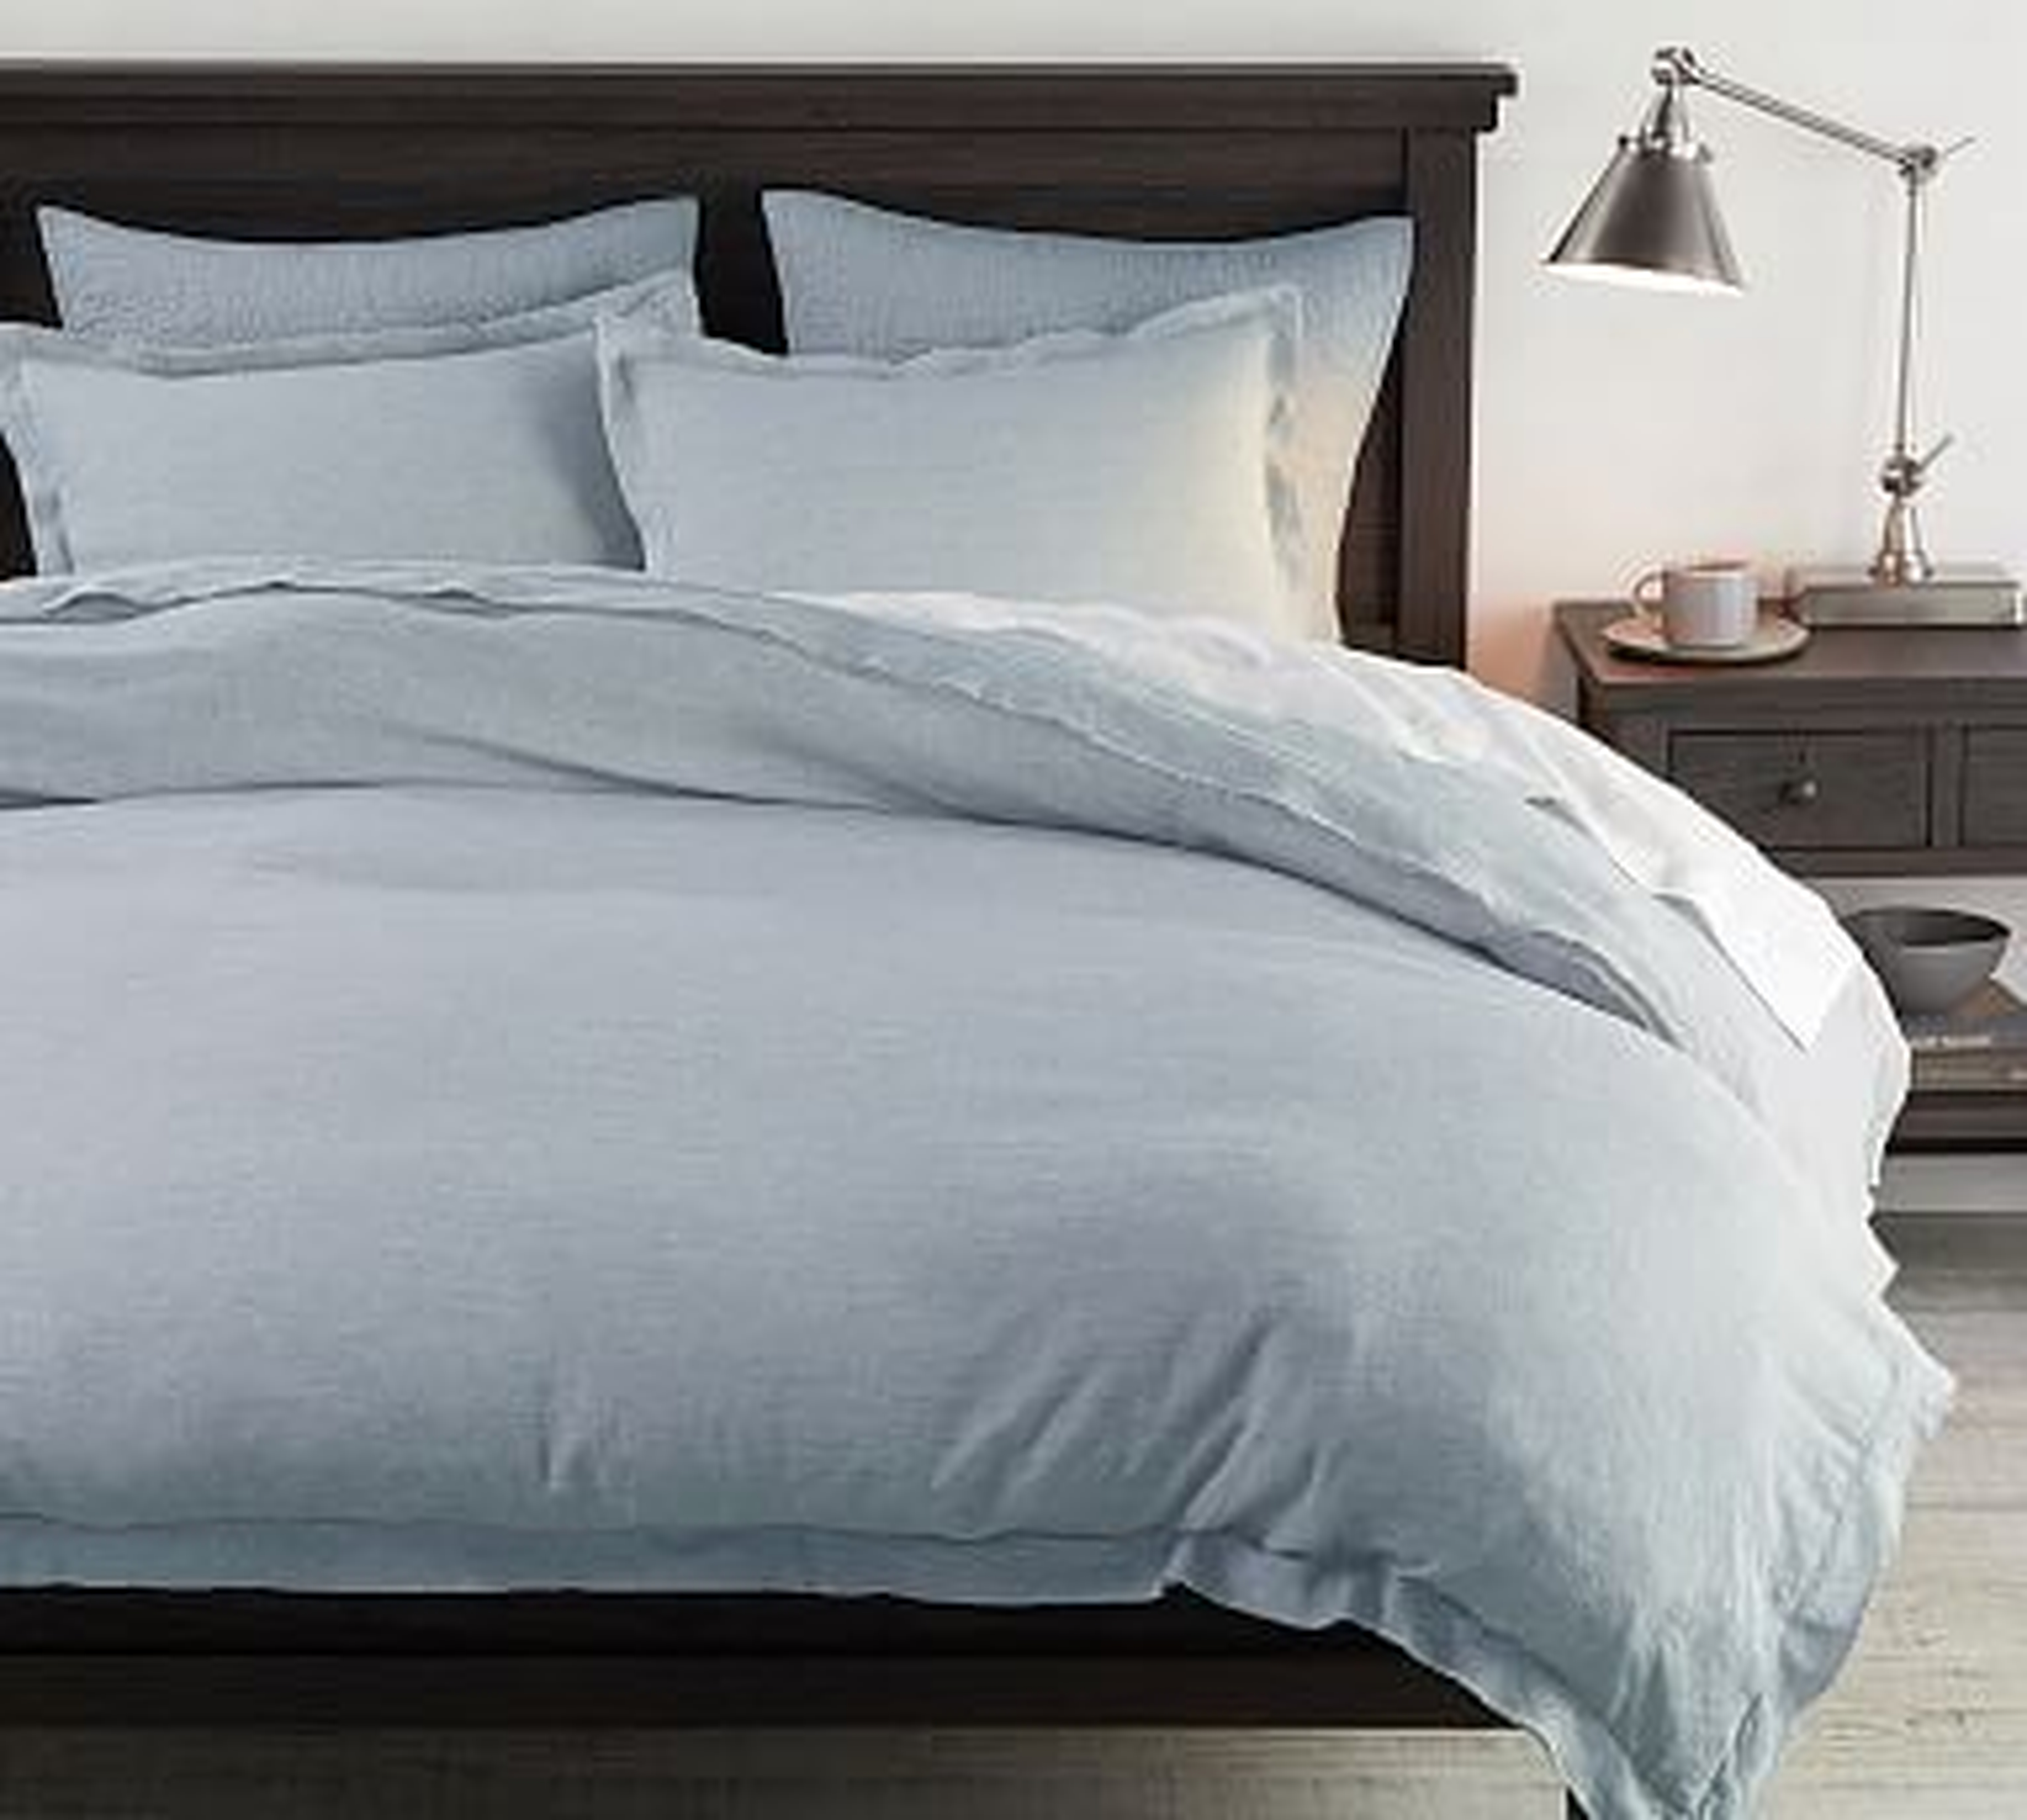 Belgian Flax Linen Double Flange Duvet Cover, King/Cal. King, Chambray/Flax - Pottery Barn